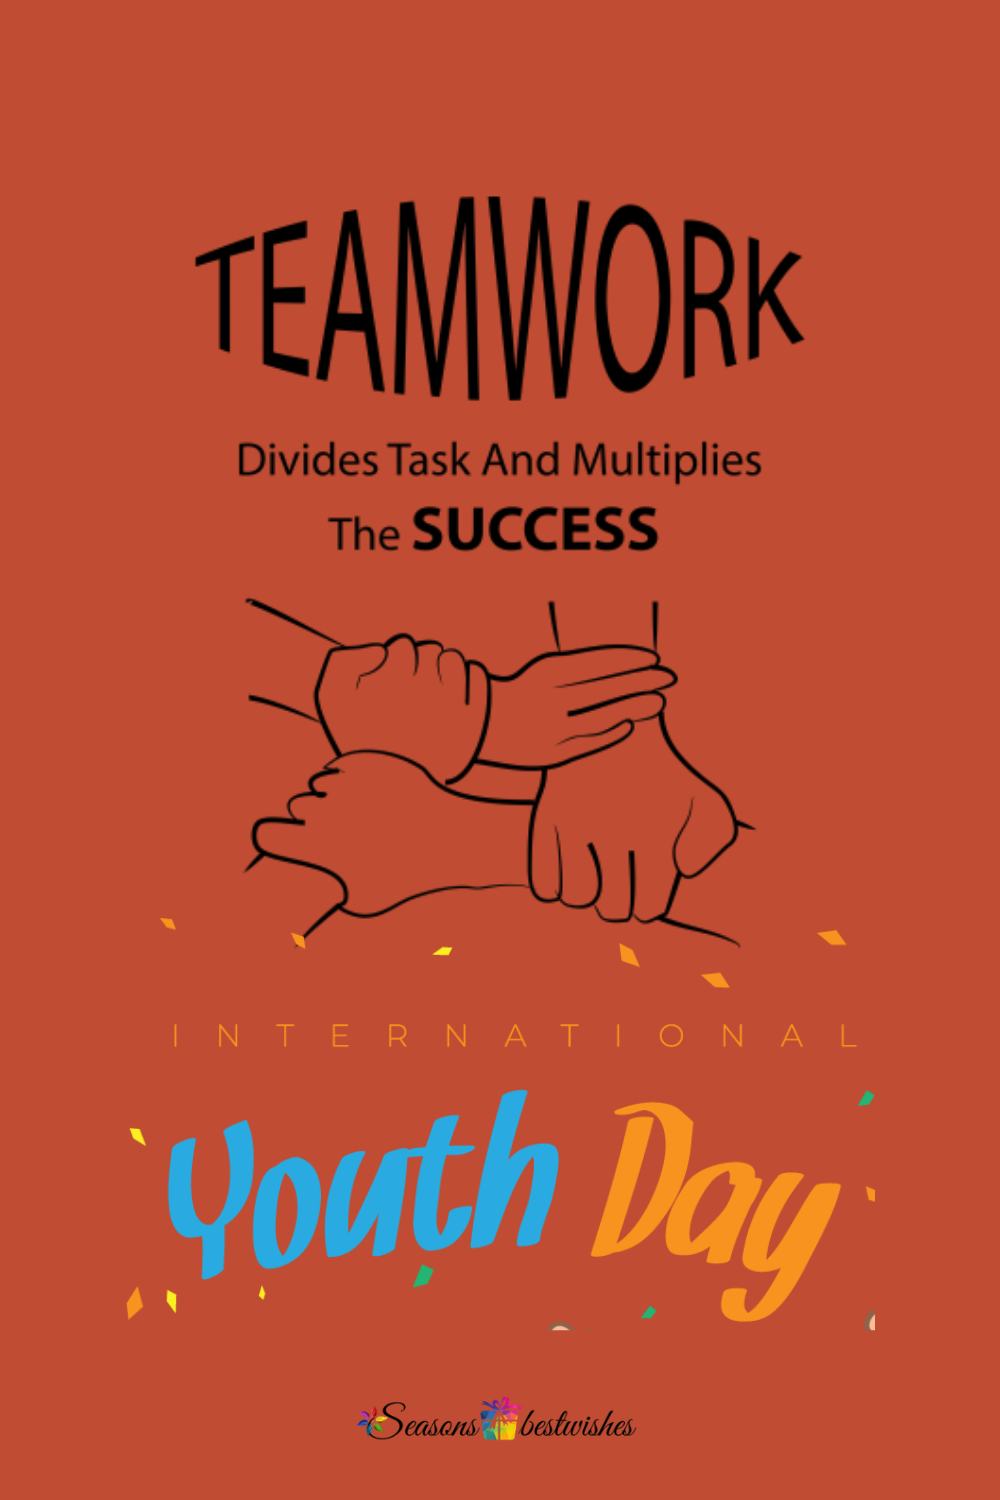 Best International Youth Day Quotes. Design. Poster. International youth day, Youth day, Tagore quotes